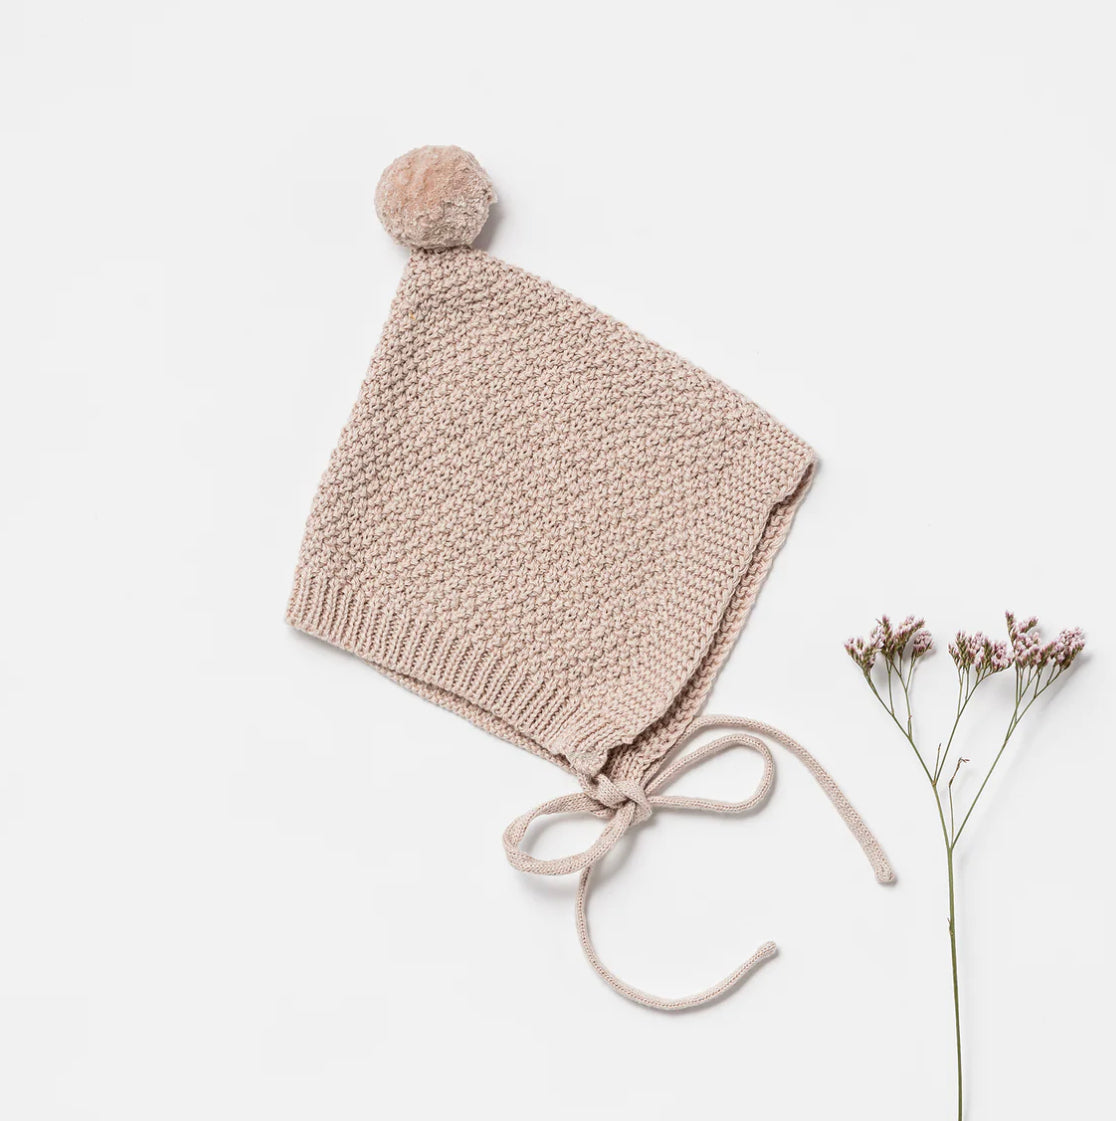 Bonnet with Pompom in fawn